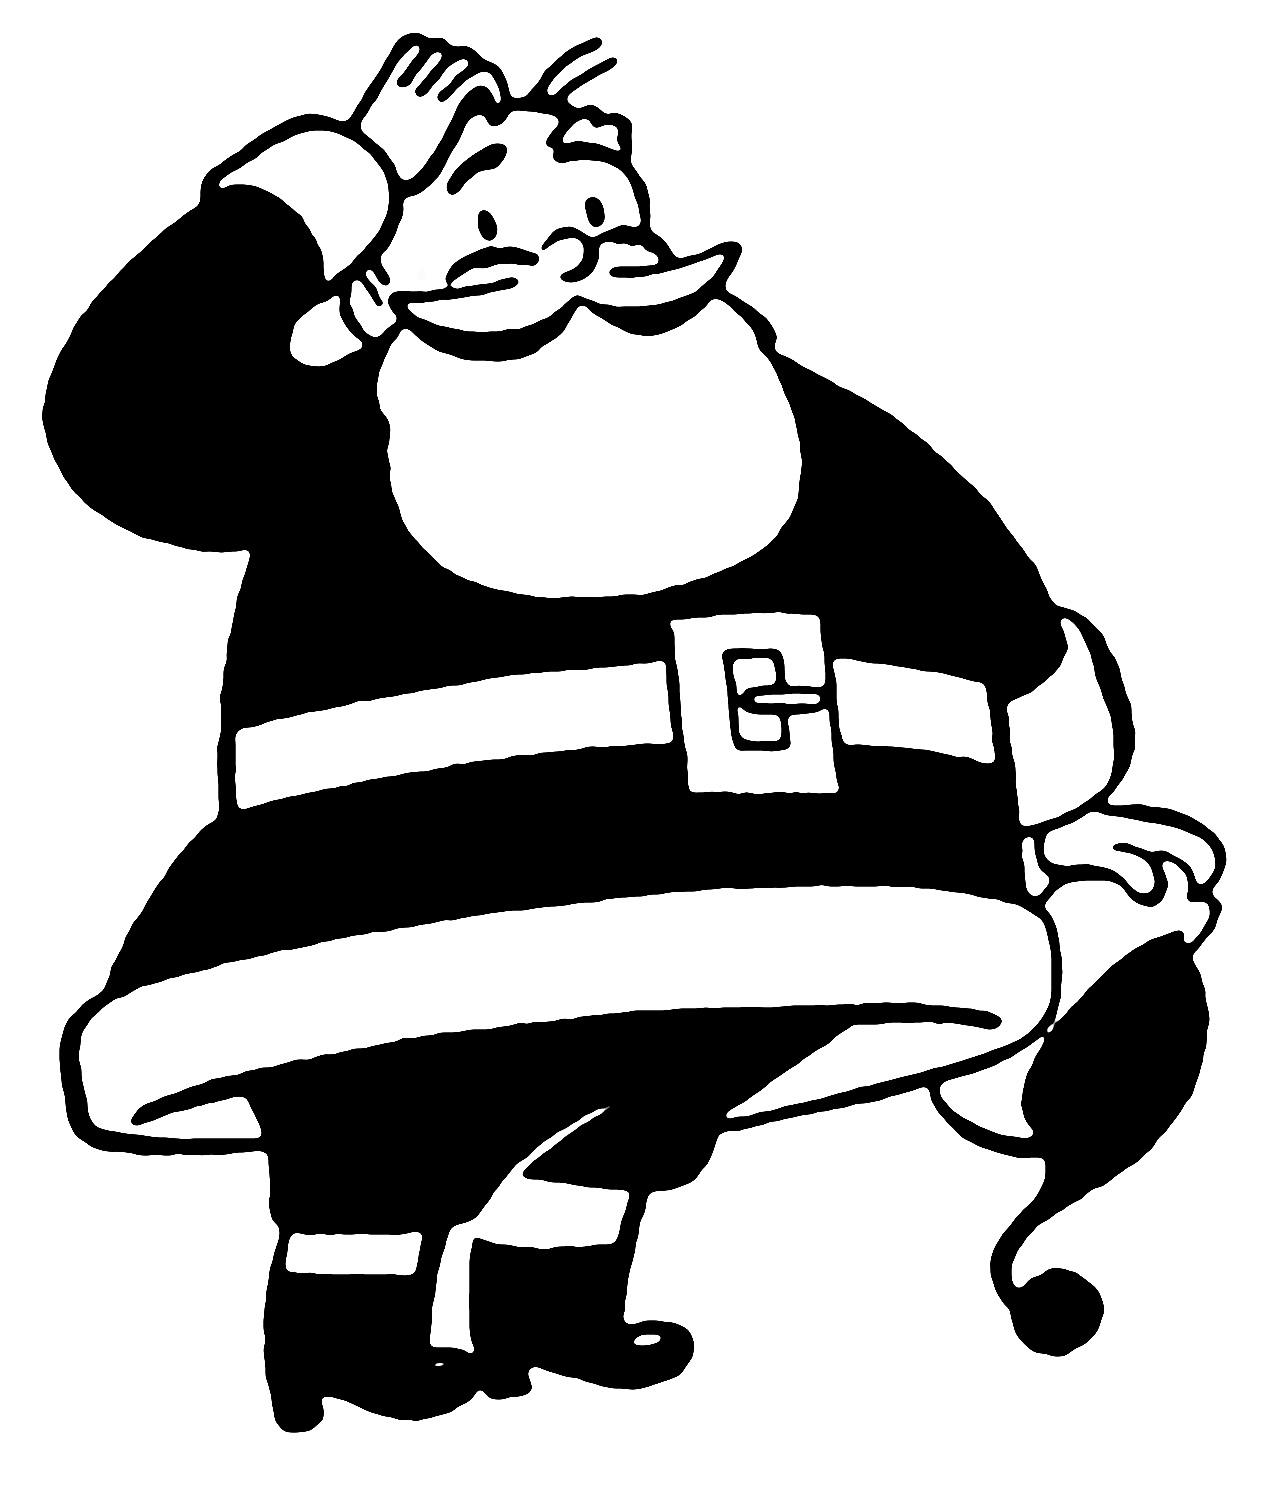 Funny christmas clipart black and white